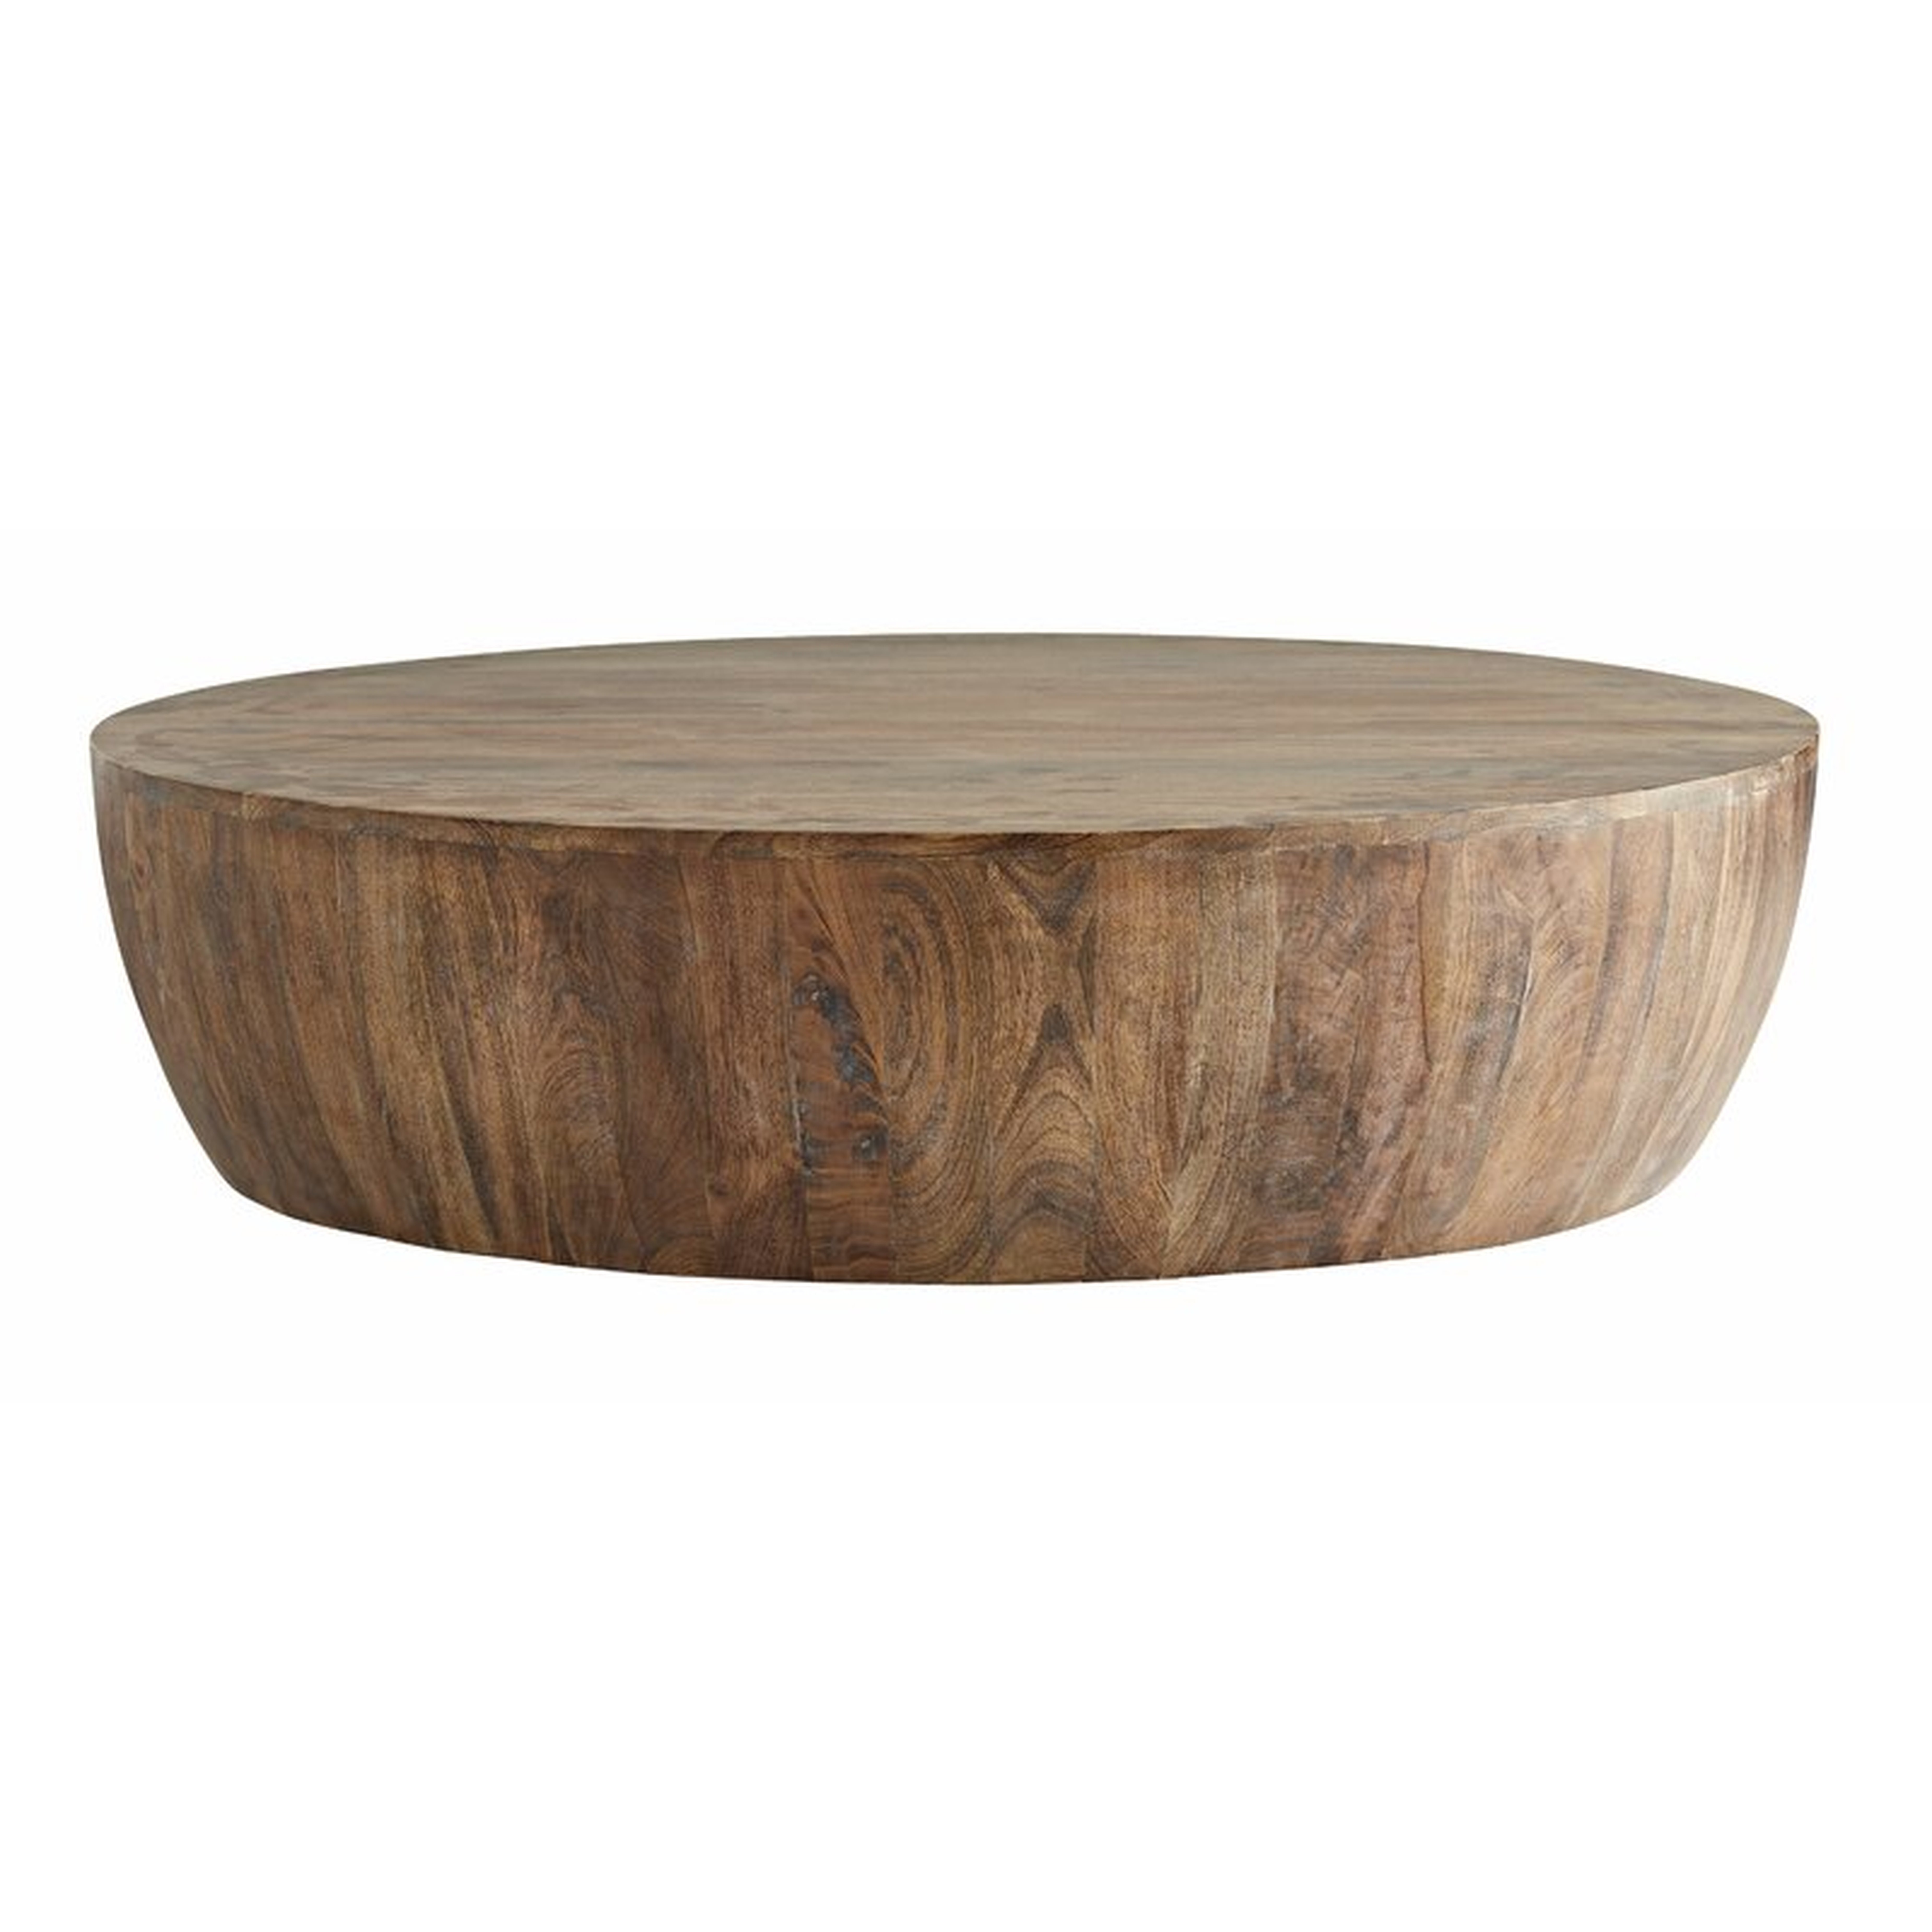 ARTERIORS JACOB LARGE COFFEE TABLE, WASHED TOBACCO - Perigold